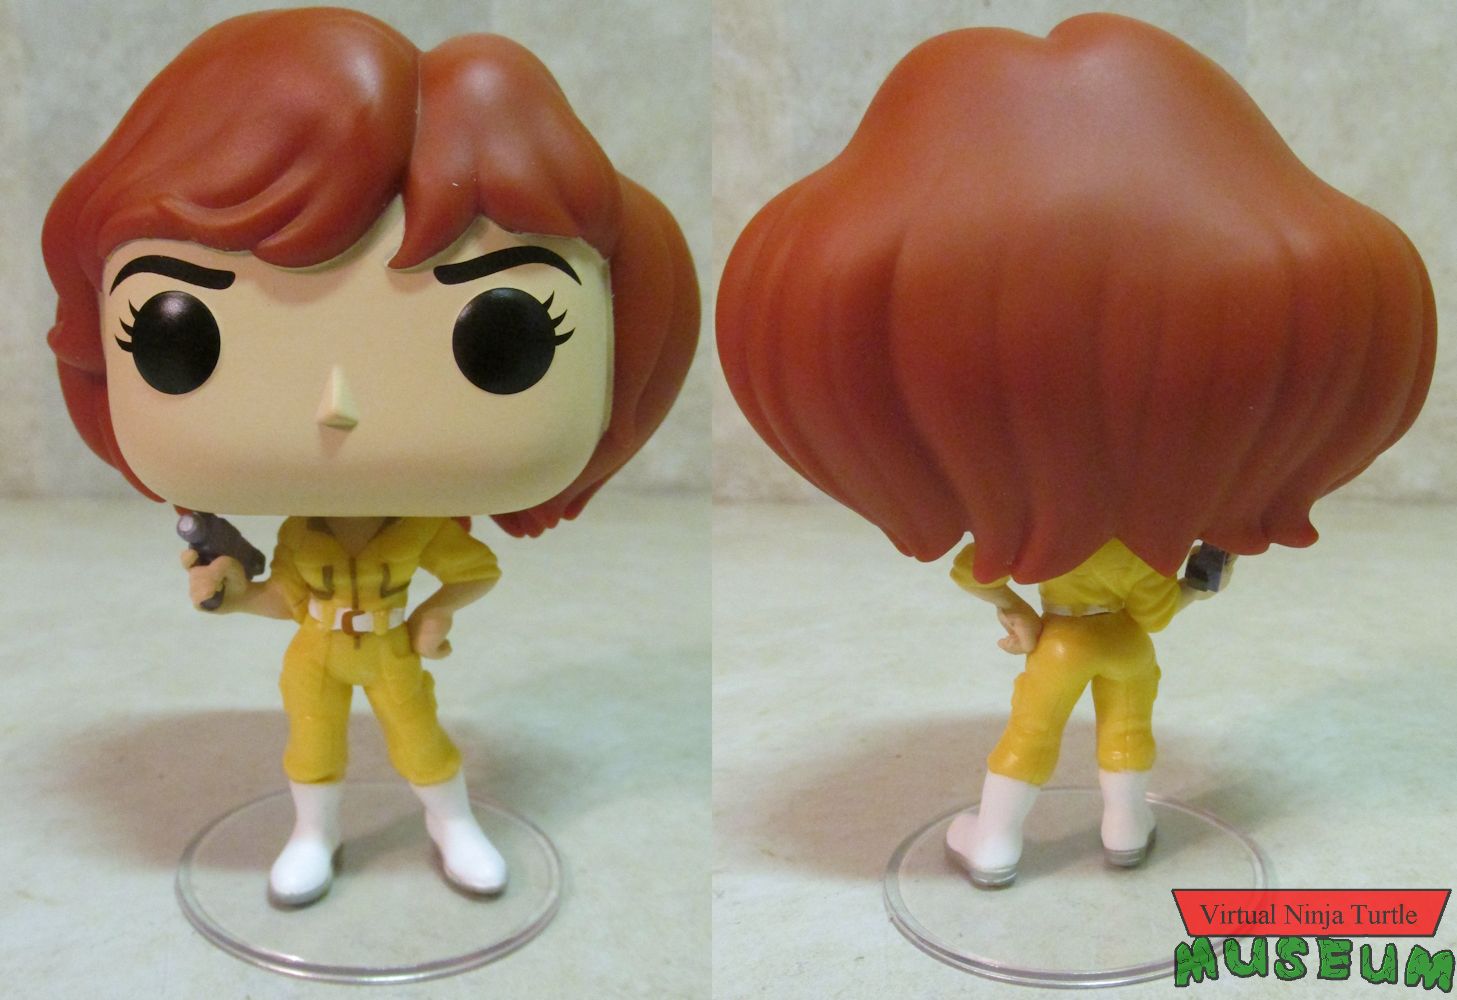 April O'Neil front and back